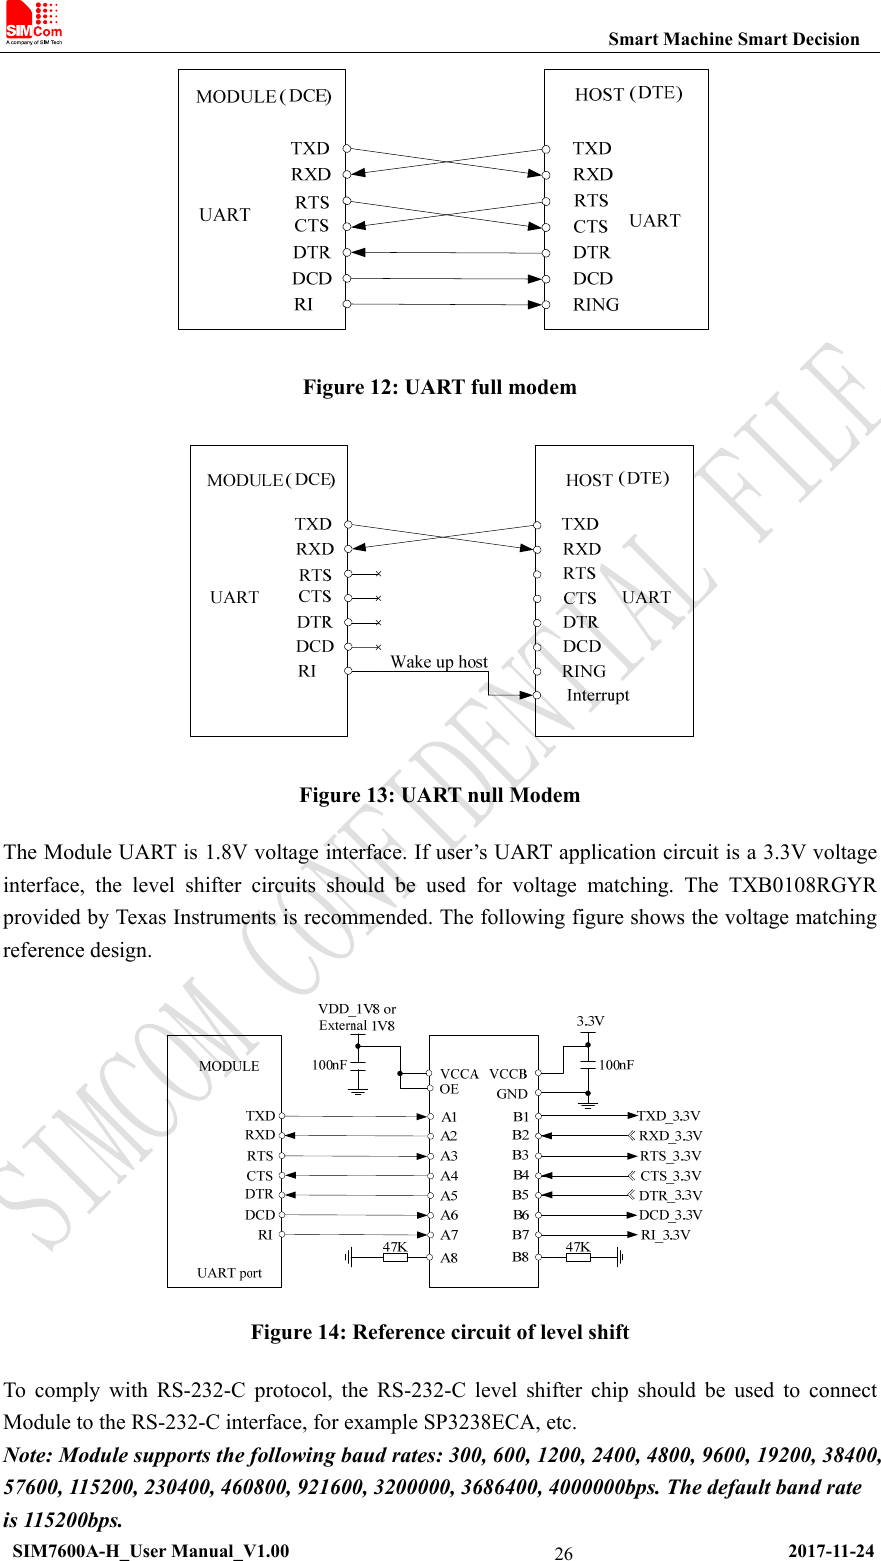                                                           Smart Machine Smart Decision  SIM7600A-H_User Manual_V1.00                                                     2017-11-24 26 Figure 12: UART full modem  Figure 13: UART null Modem The Module UART is 1.8V voltage interface. If user’s UART application circuit is a 3.3V voltage interface, the level shifter circuits should be used for voltage matching. The TXB0108RGYR provided by Texas Instruments is recommended. The following figure shows the voltage matching reference design.   Figure 14: Reference circuit of level shift To comply with RS-232-C protocol, the RS-232-C level shifter chip should be used to connect Module to the RS-232-C interface, for example SP3238ECA, etc. Note: Module supports the following baud rates: 300, 600, 1200, 2400, 4800, 9600, 19200, 38400, 57600, 115200, 230400, 460800, 921600, 3200000, 3686400, 4000000bps. The default band rate is 115200bps. 